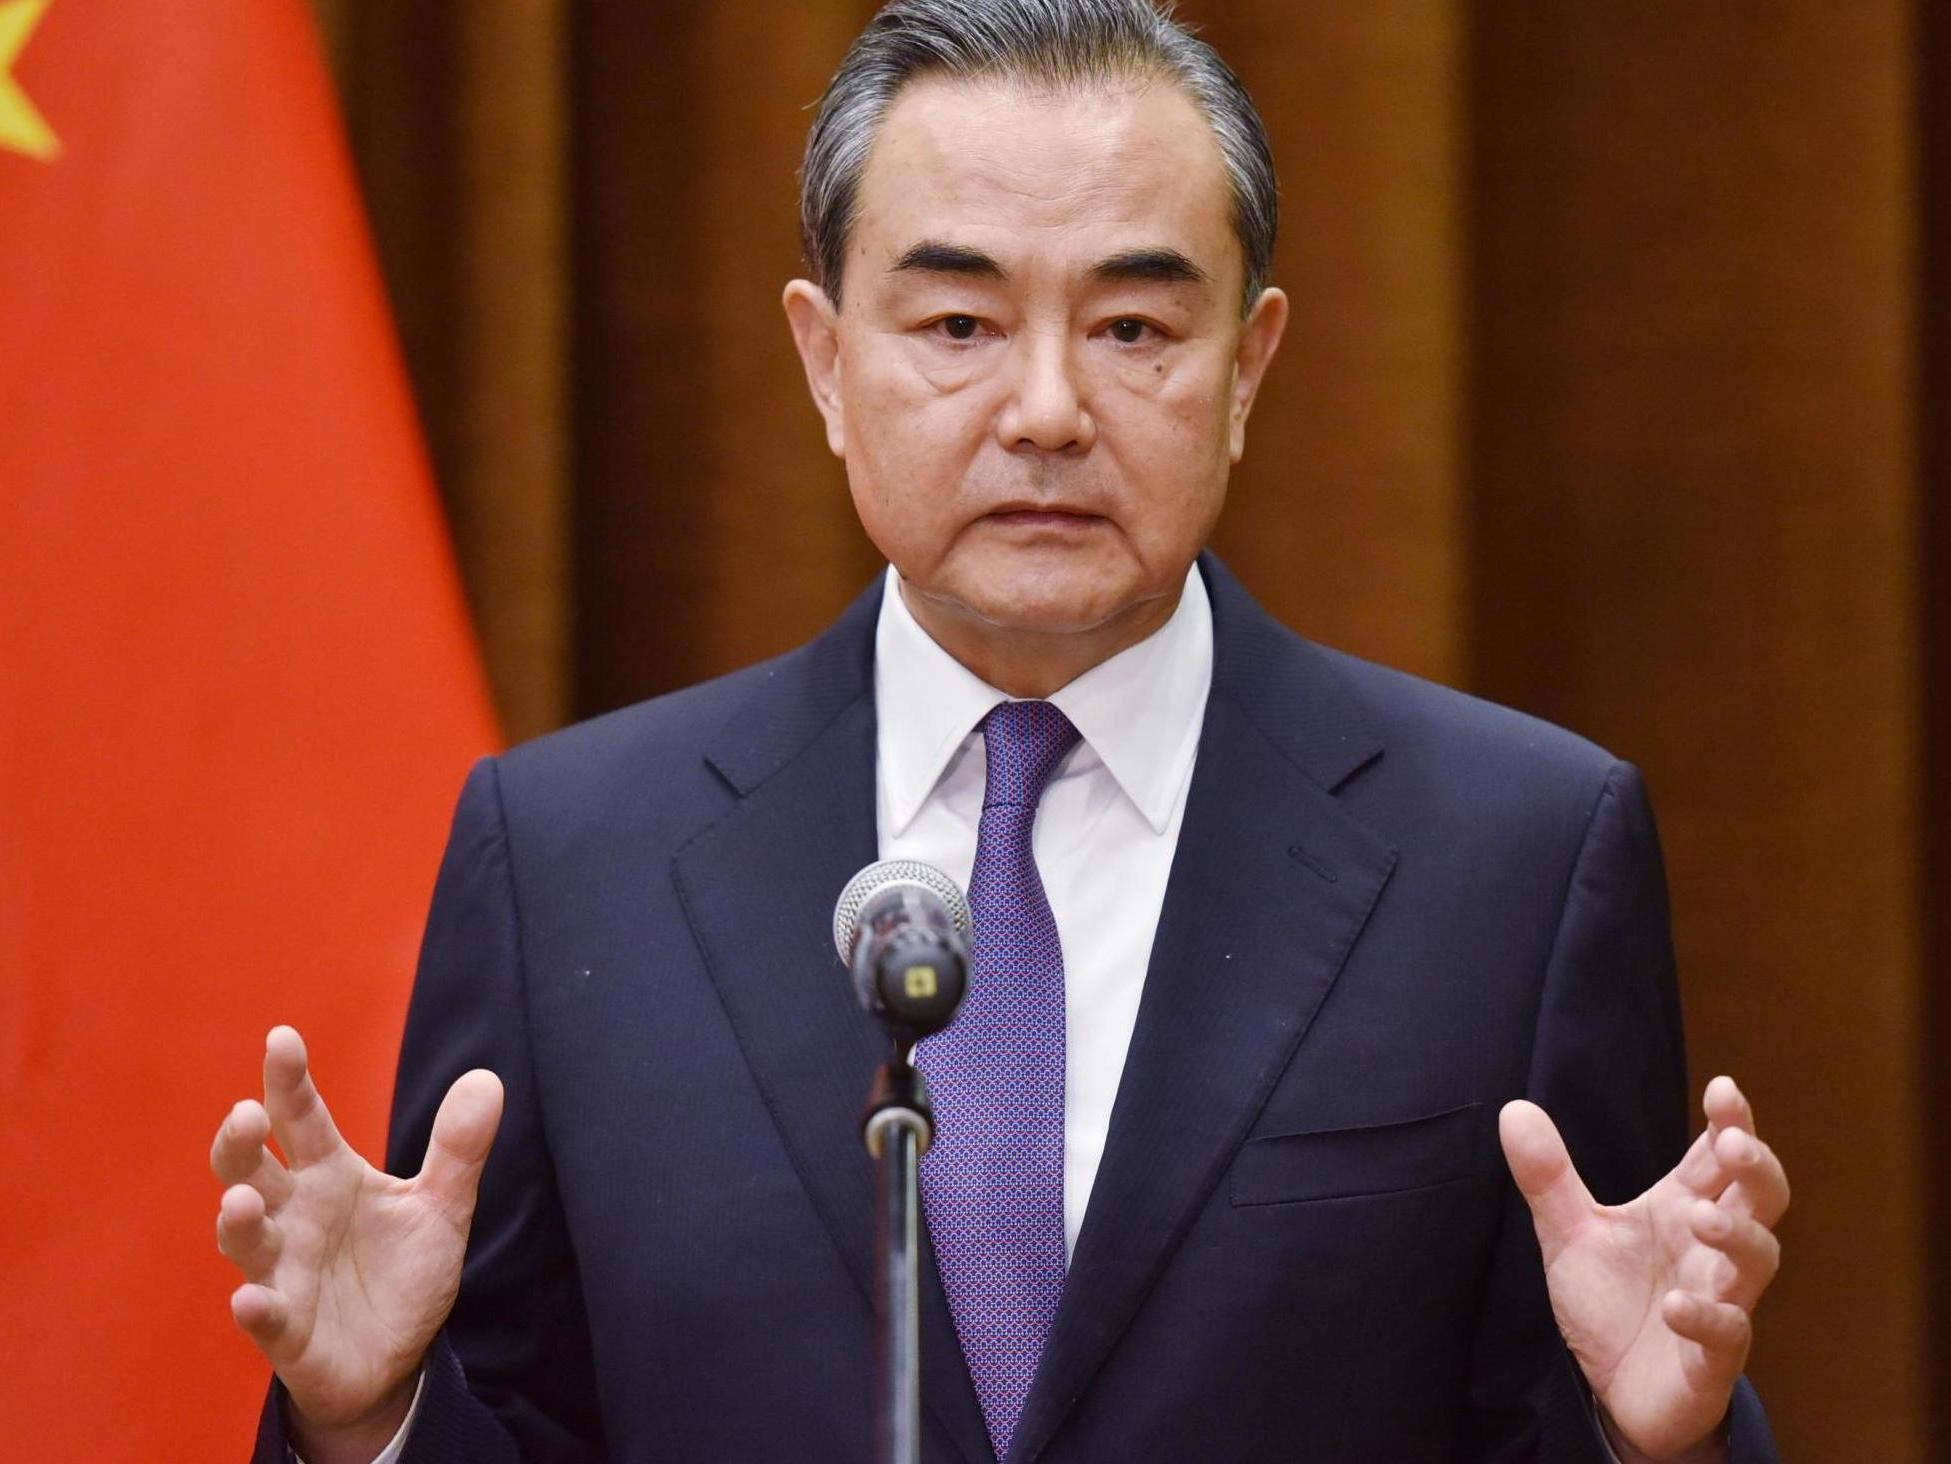 Foreign minister Wang Yi speaking at a joint briefing with the Association of South East Asian Nations in June 2018